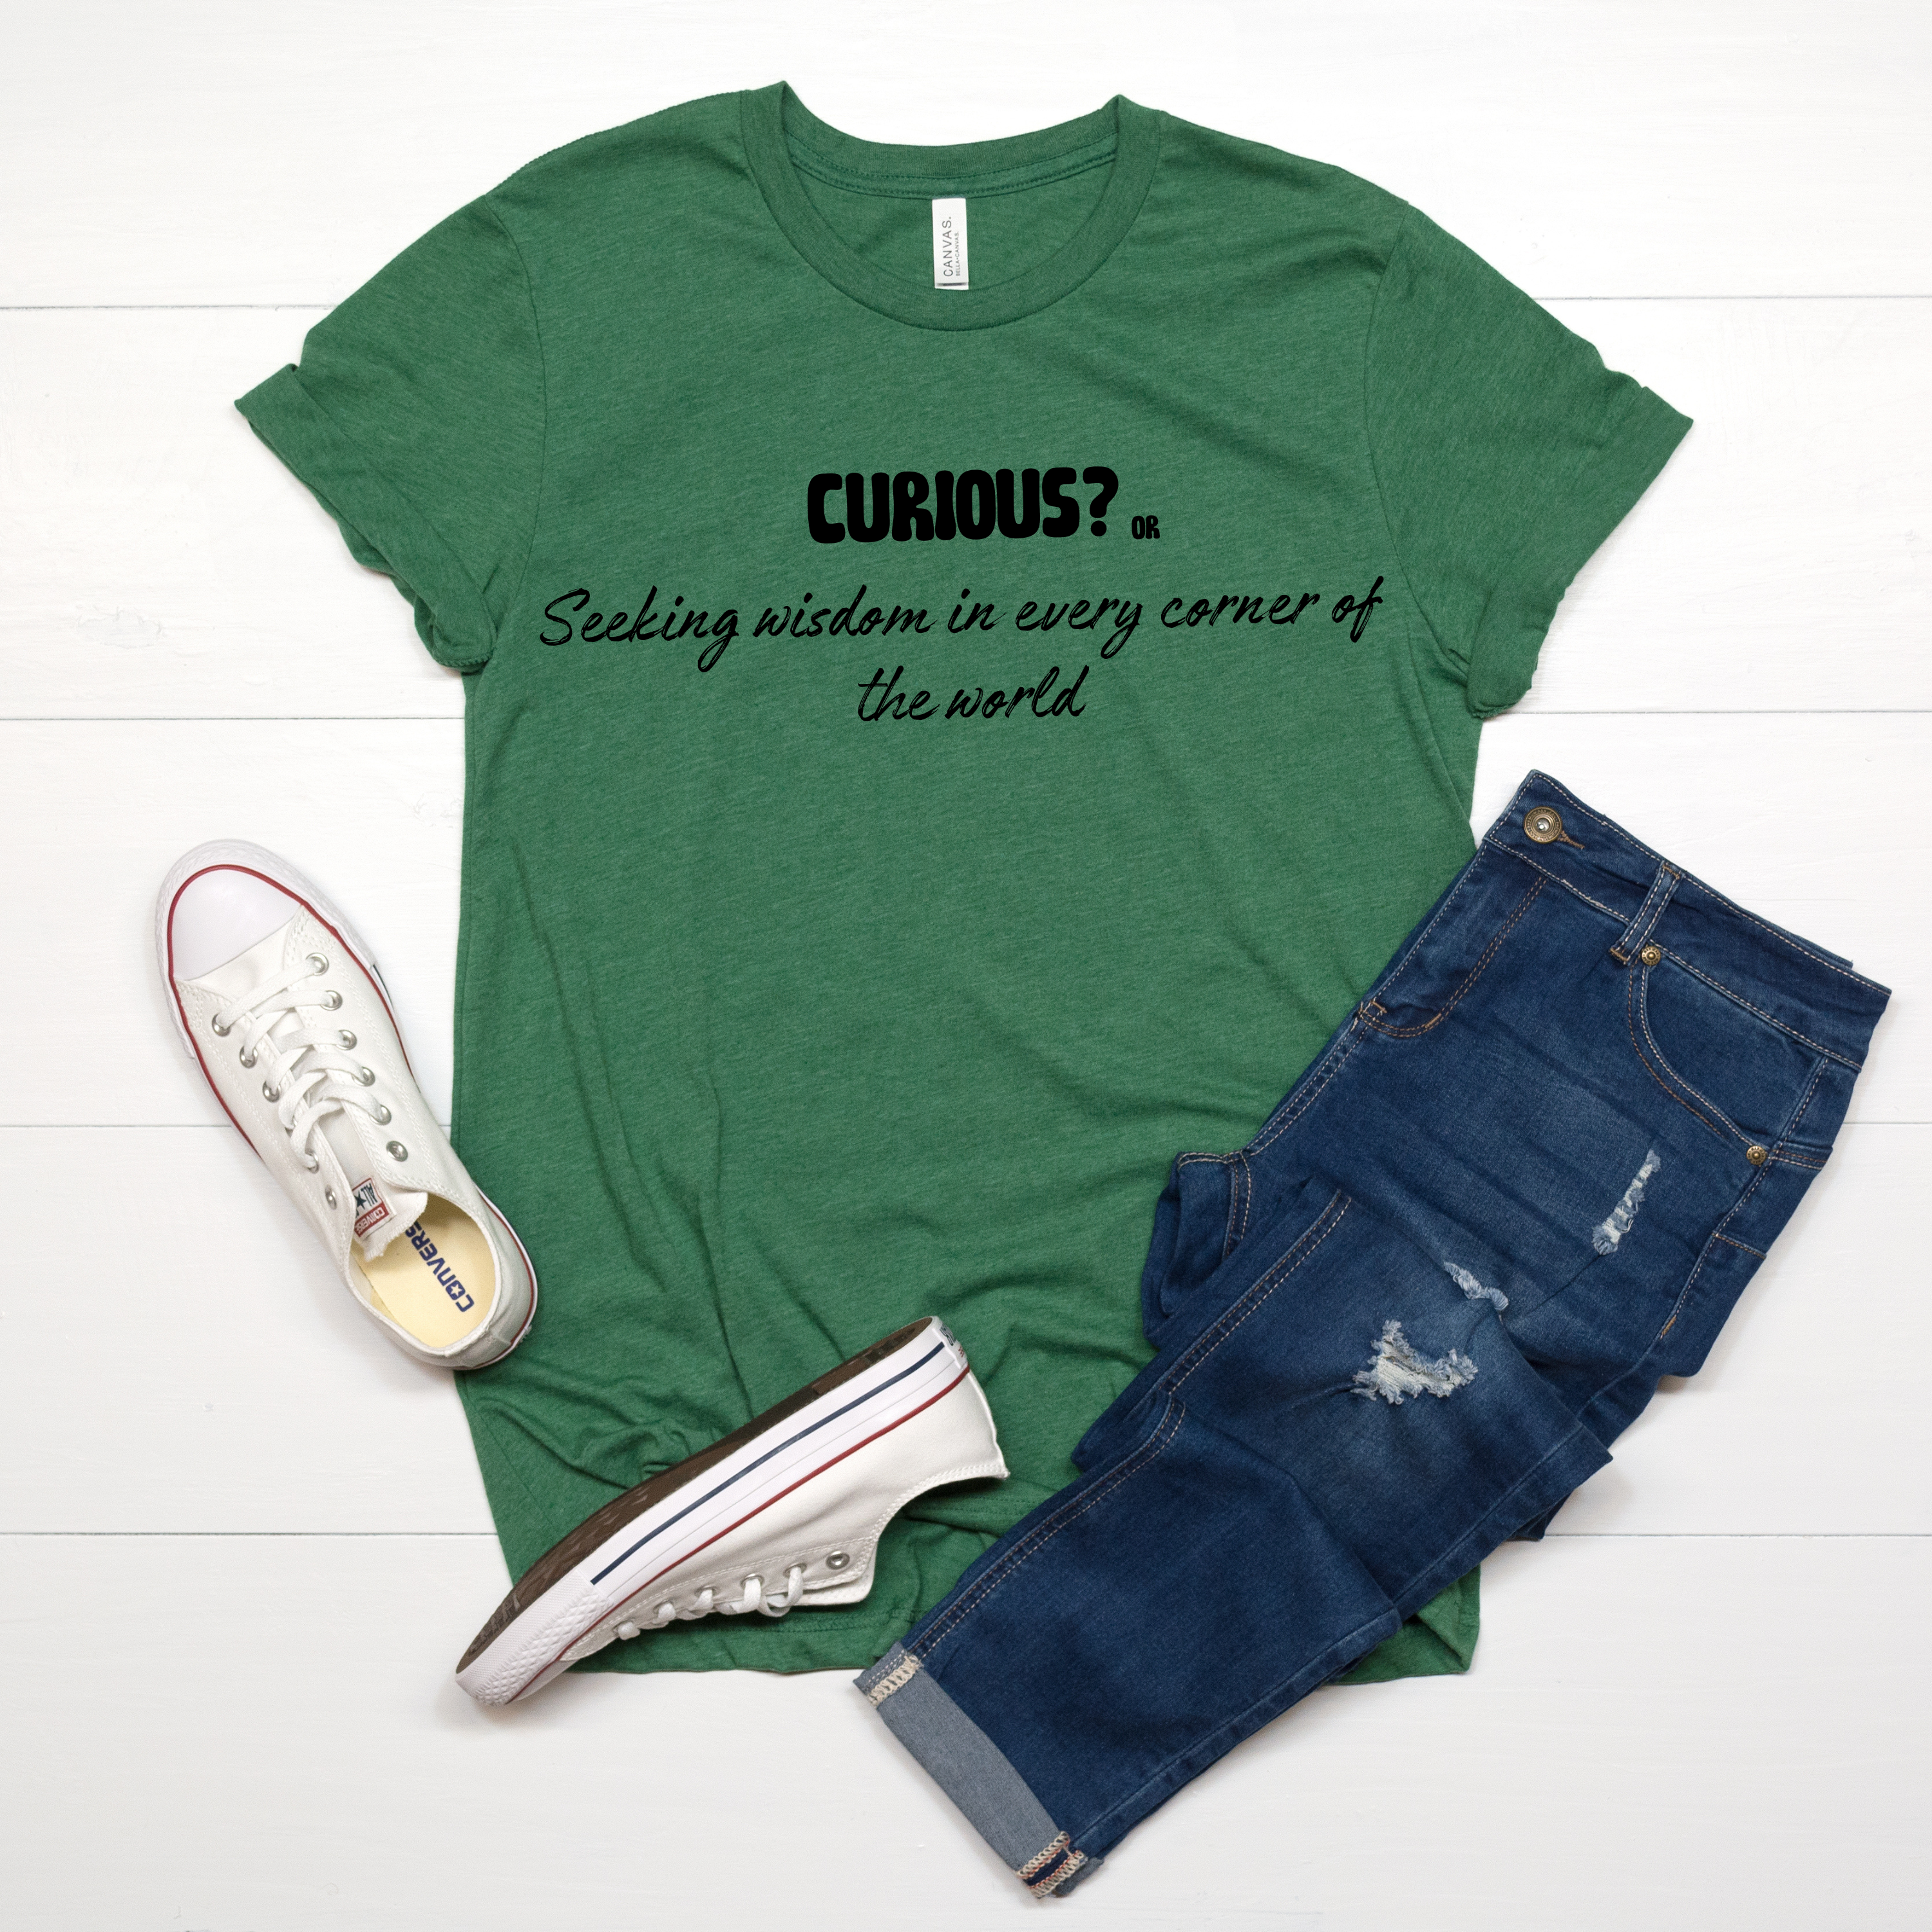 Curious? or Seeking wisdom in every corner of the world T-shirt.